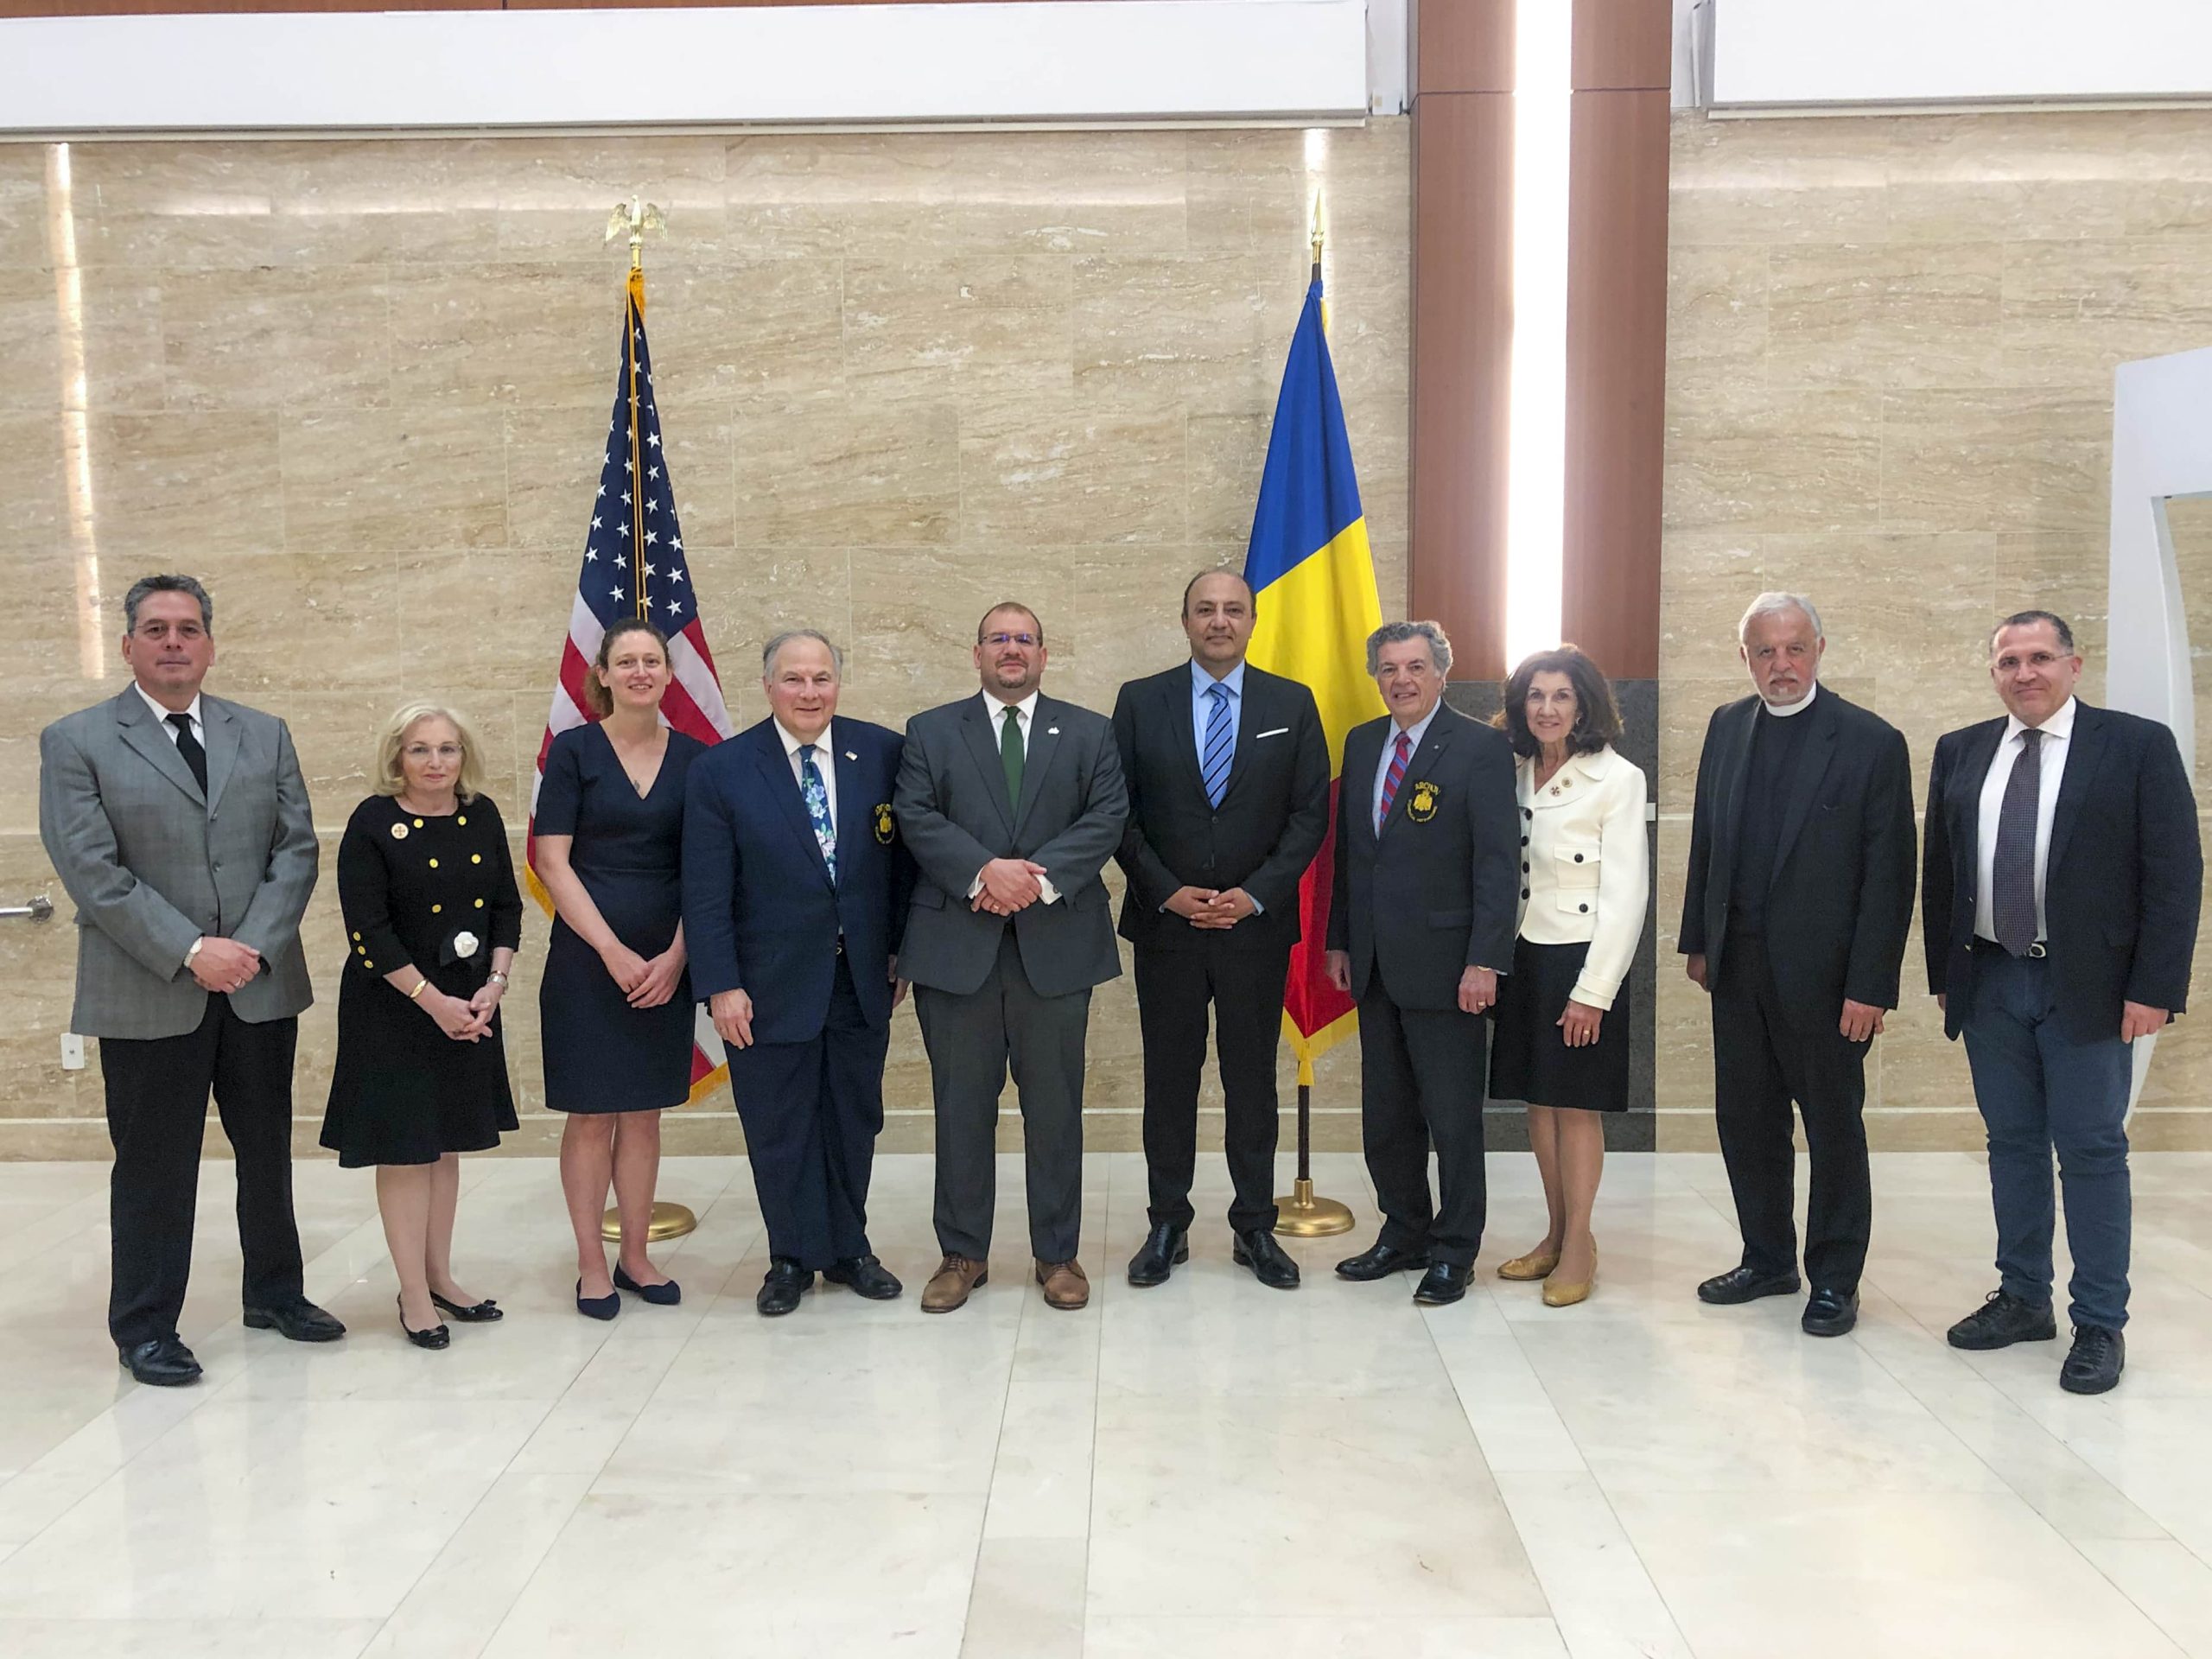 The Alexandrion Foundation has hosted the delegation of the Saint Andrew Order, Archons of the Ecumenical Patriarchate, on their religious freedom mission to Romania